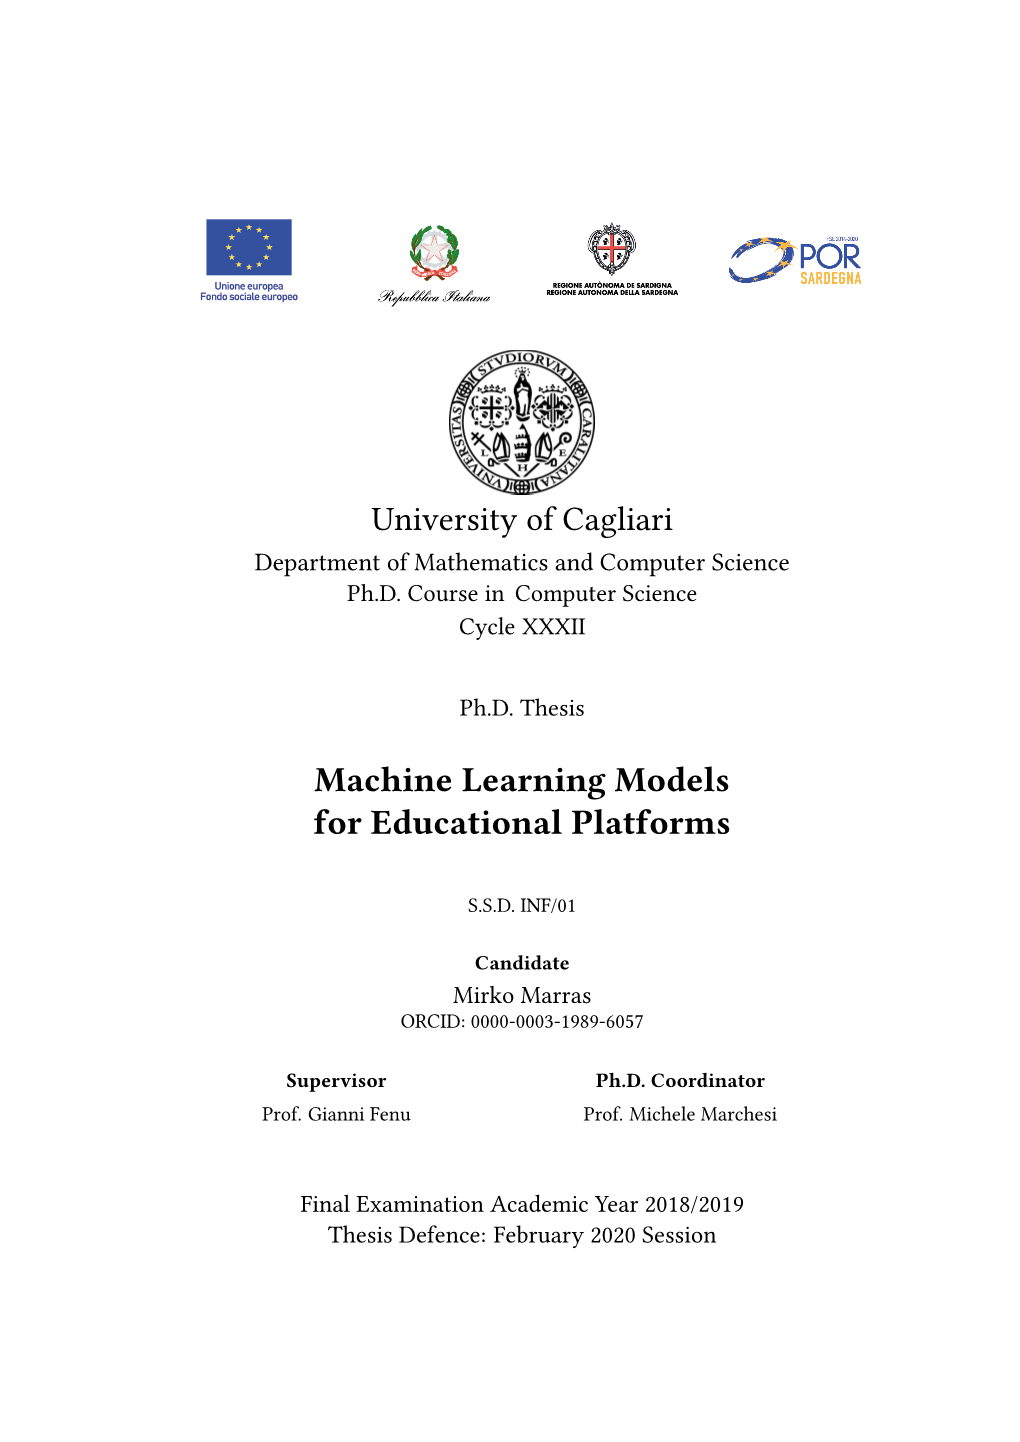 Machine Learning Models for Educational Platforms